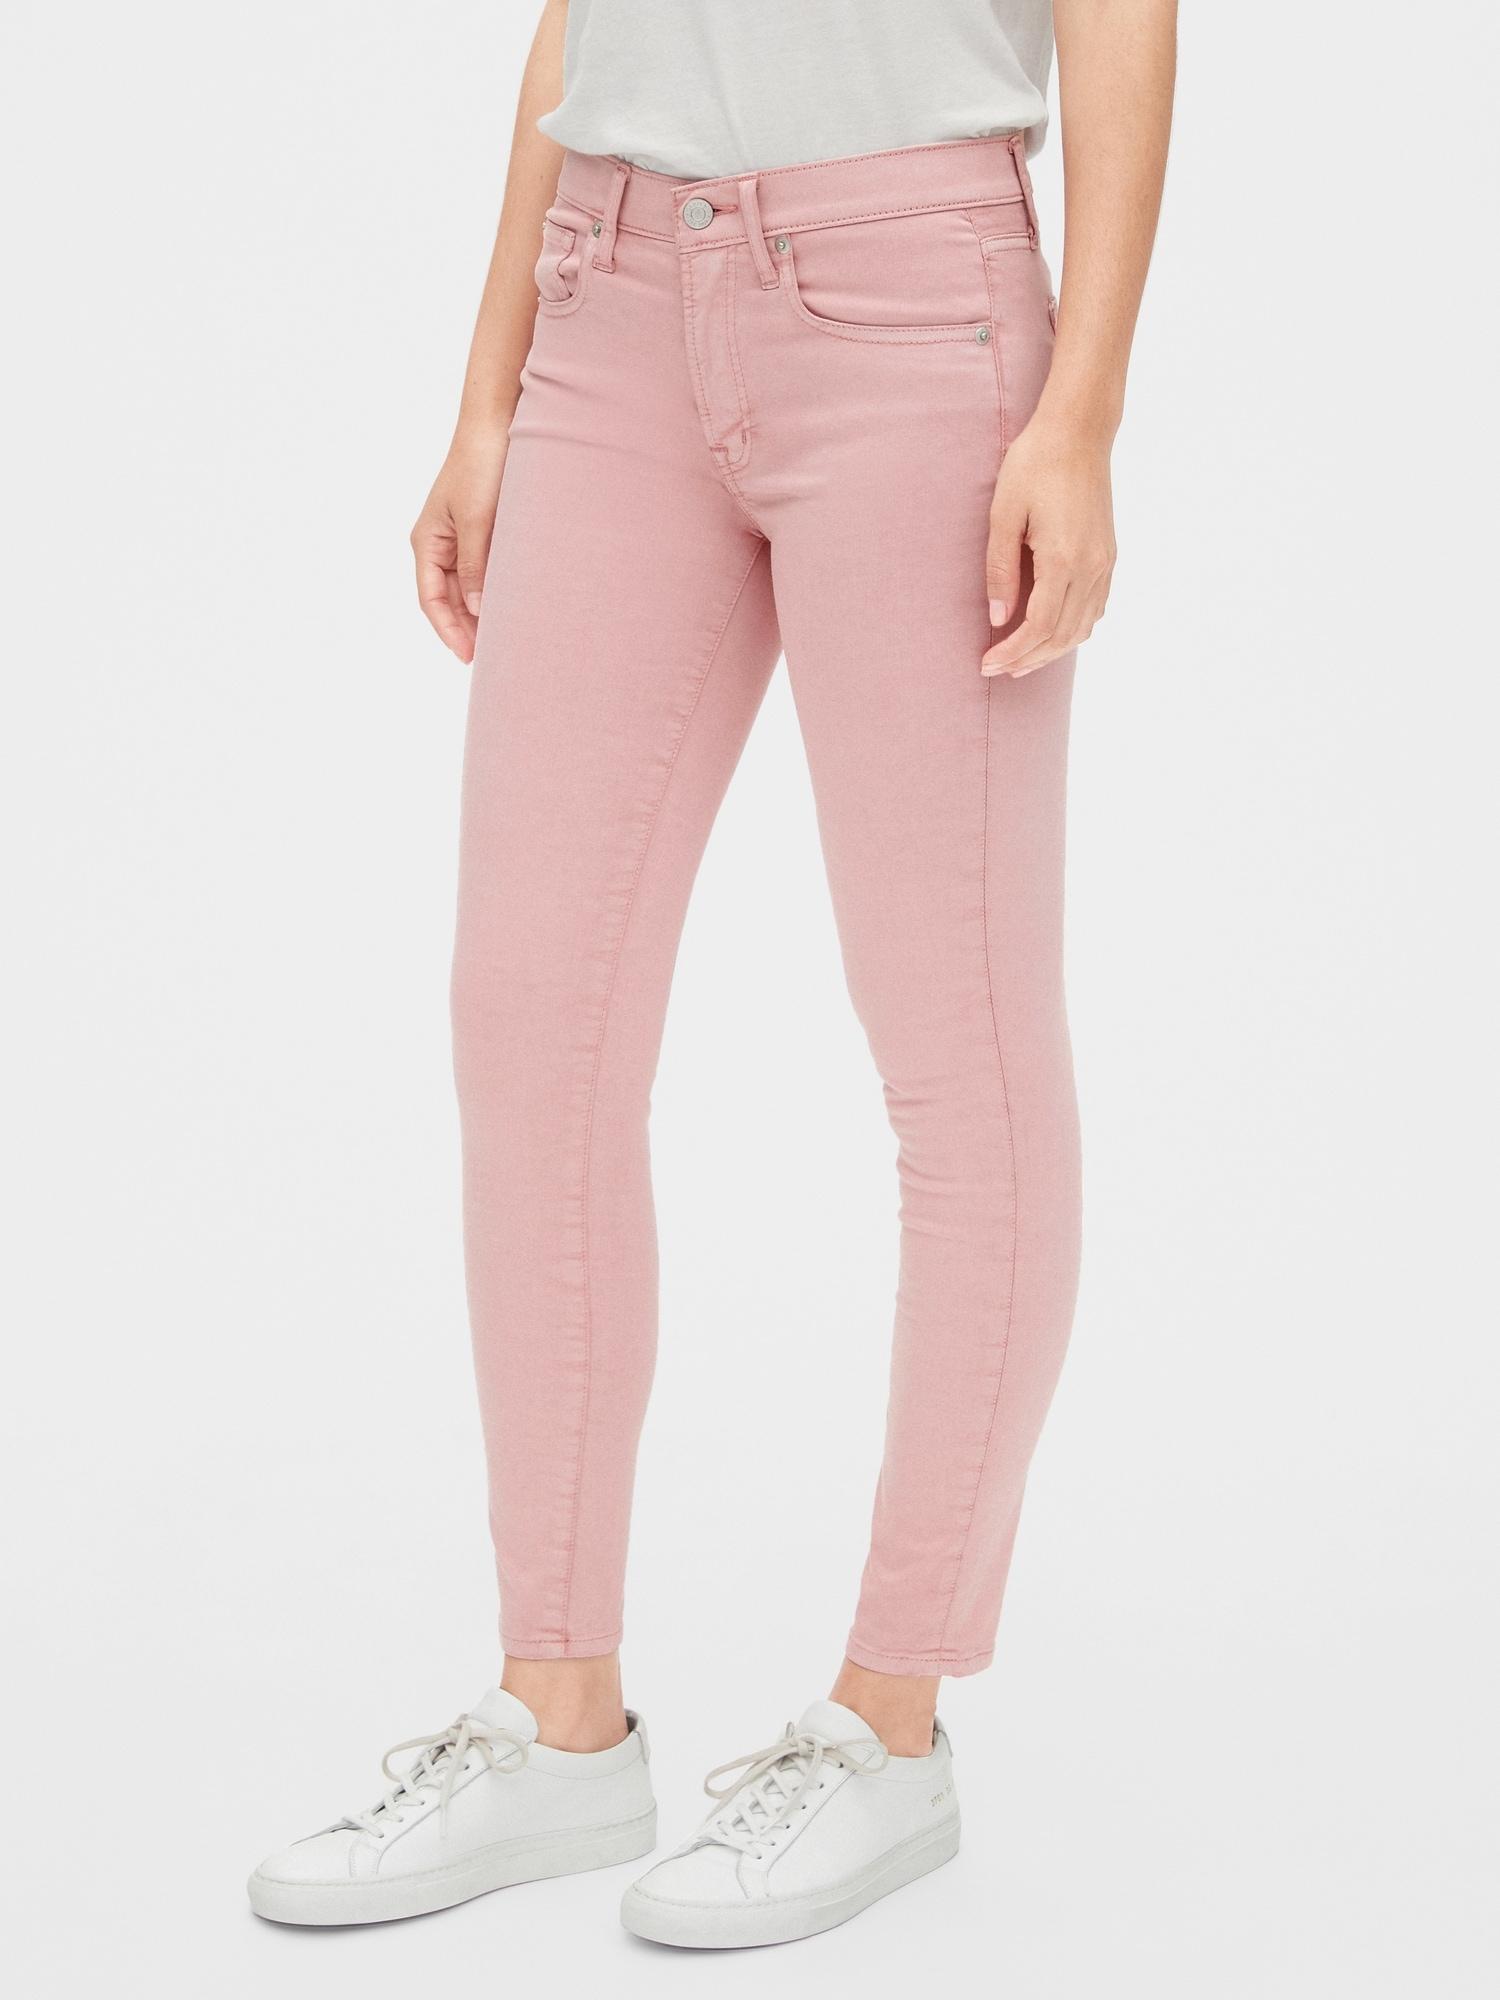 Gap Denim Soft Wear Mid Rise True Skinny Ankle Jeans In Color in Pink - Lyst